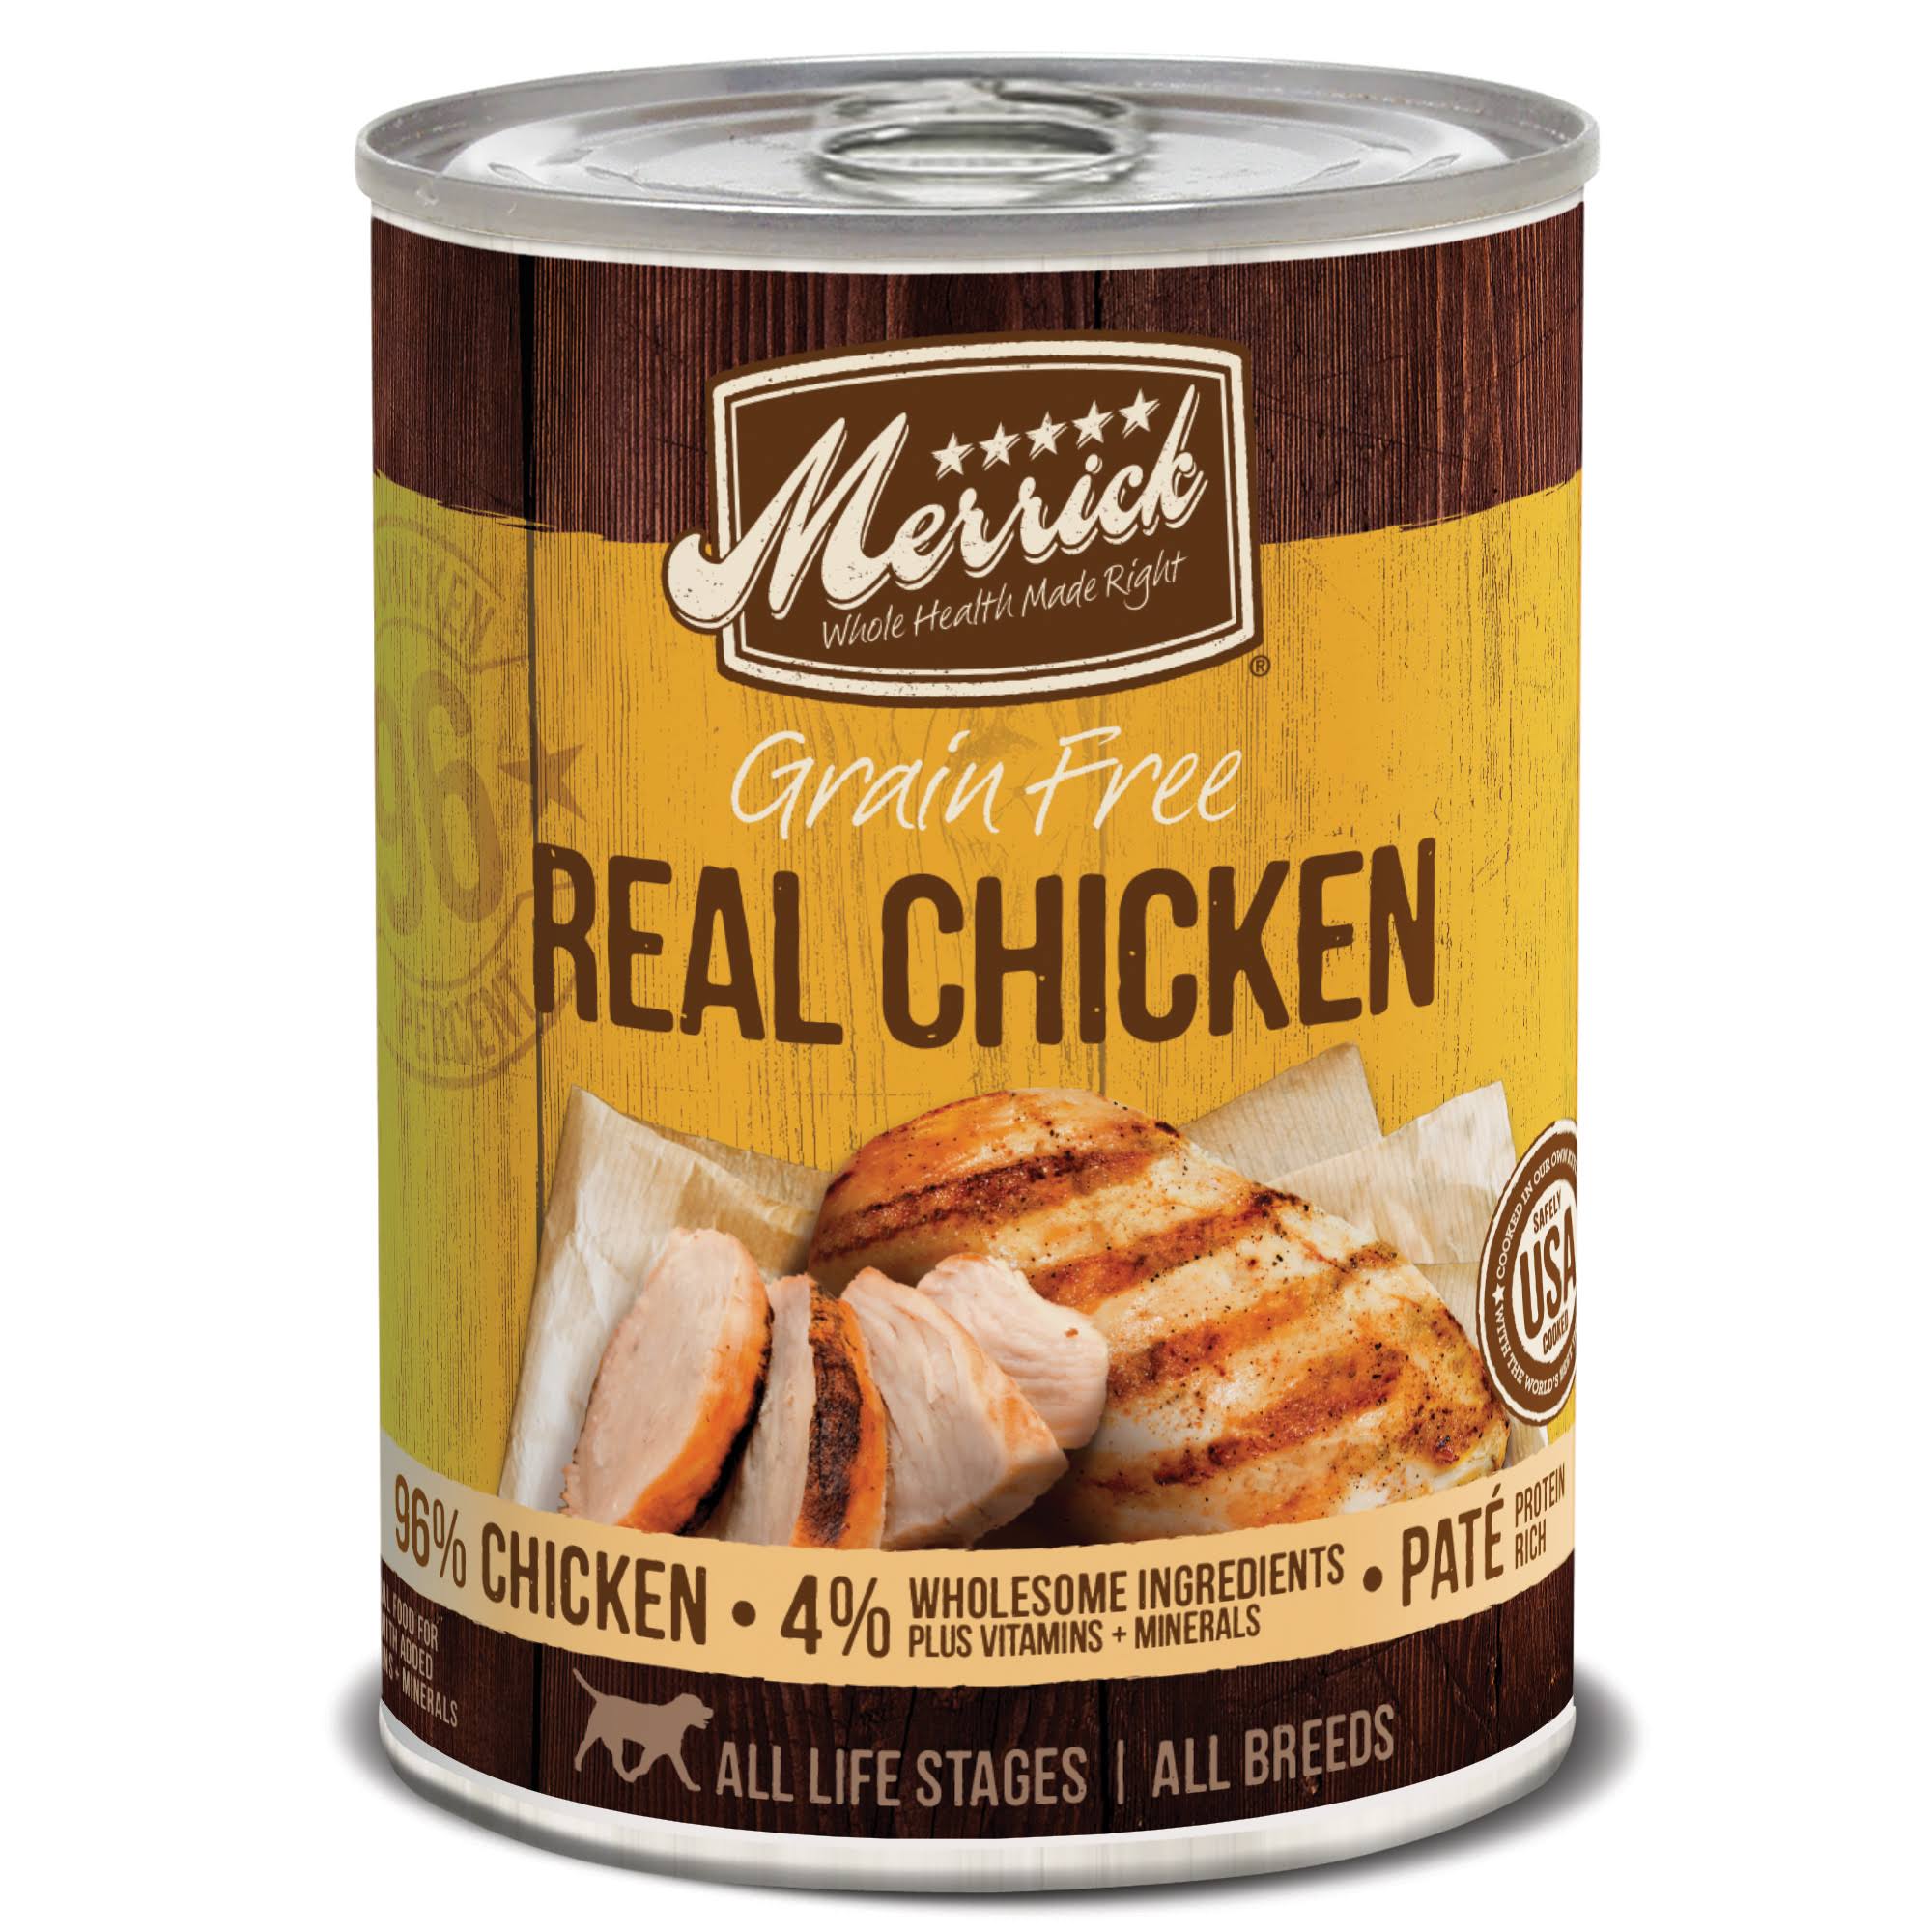 Merrick Grain Free Real Chicken 12.7oz Canned Dog Food